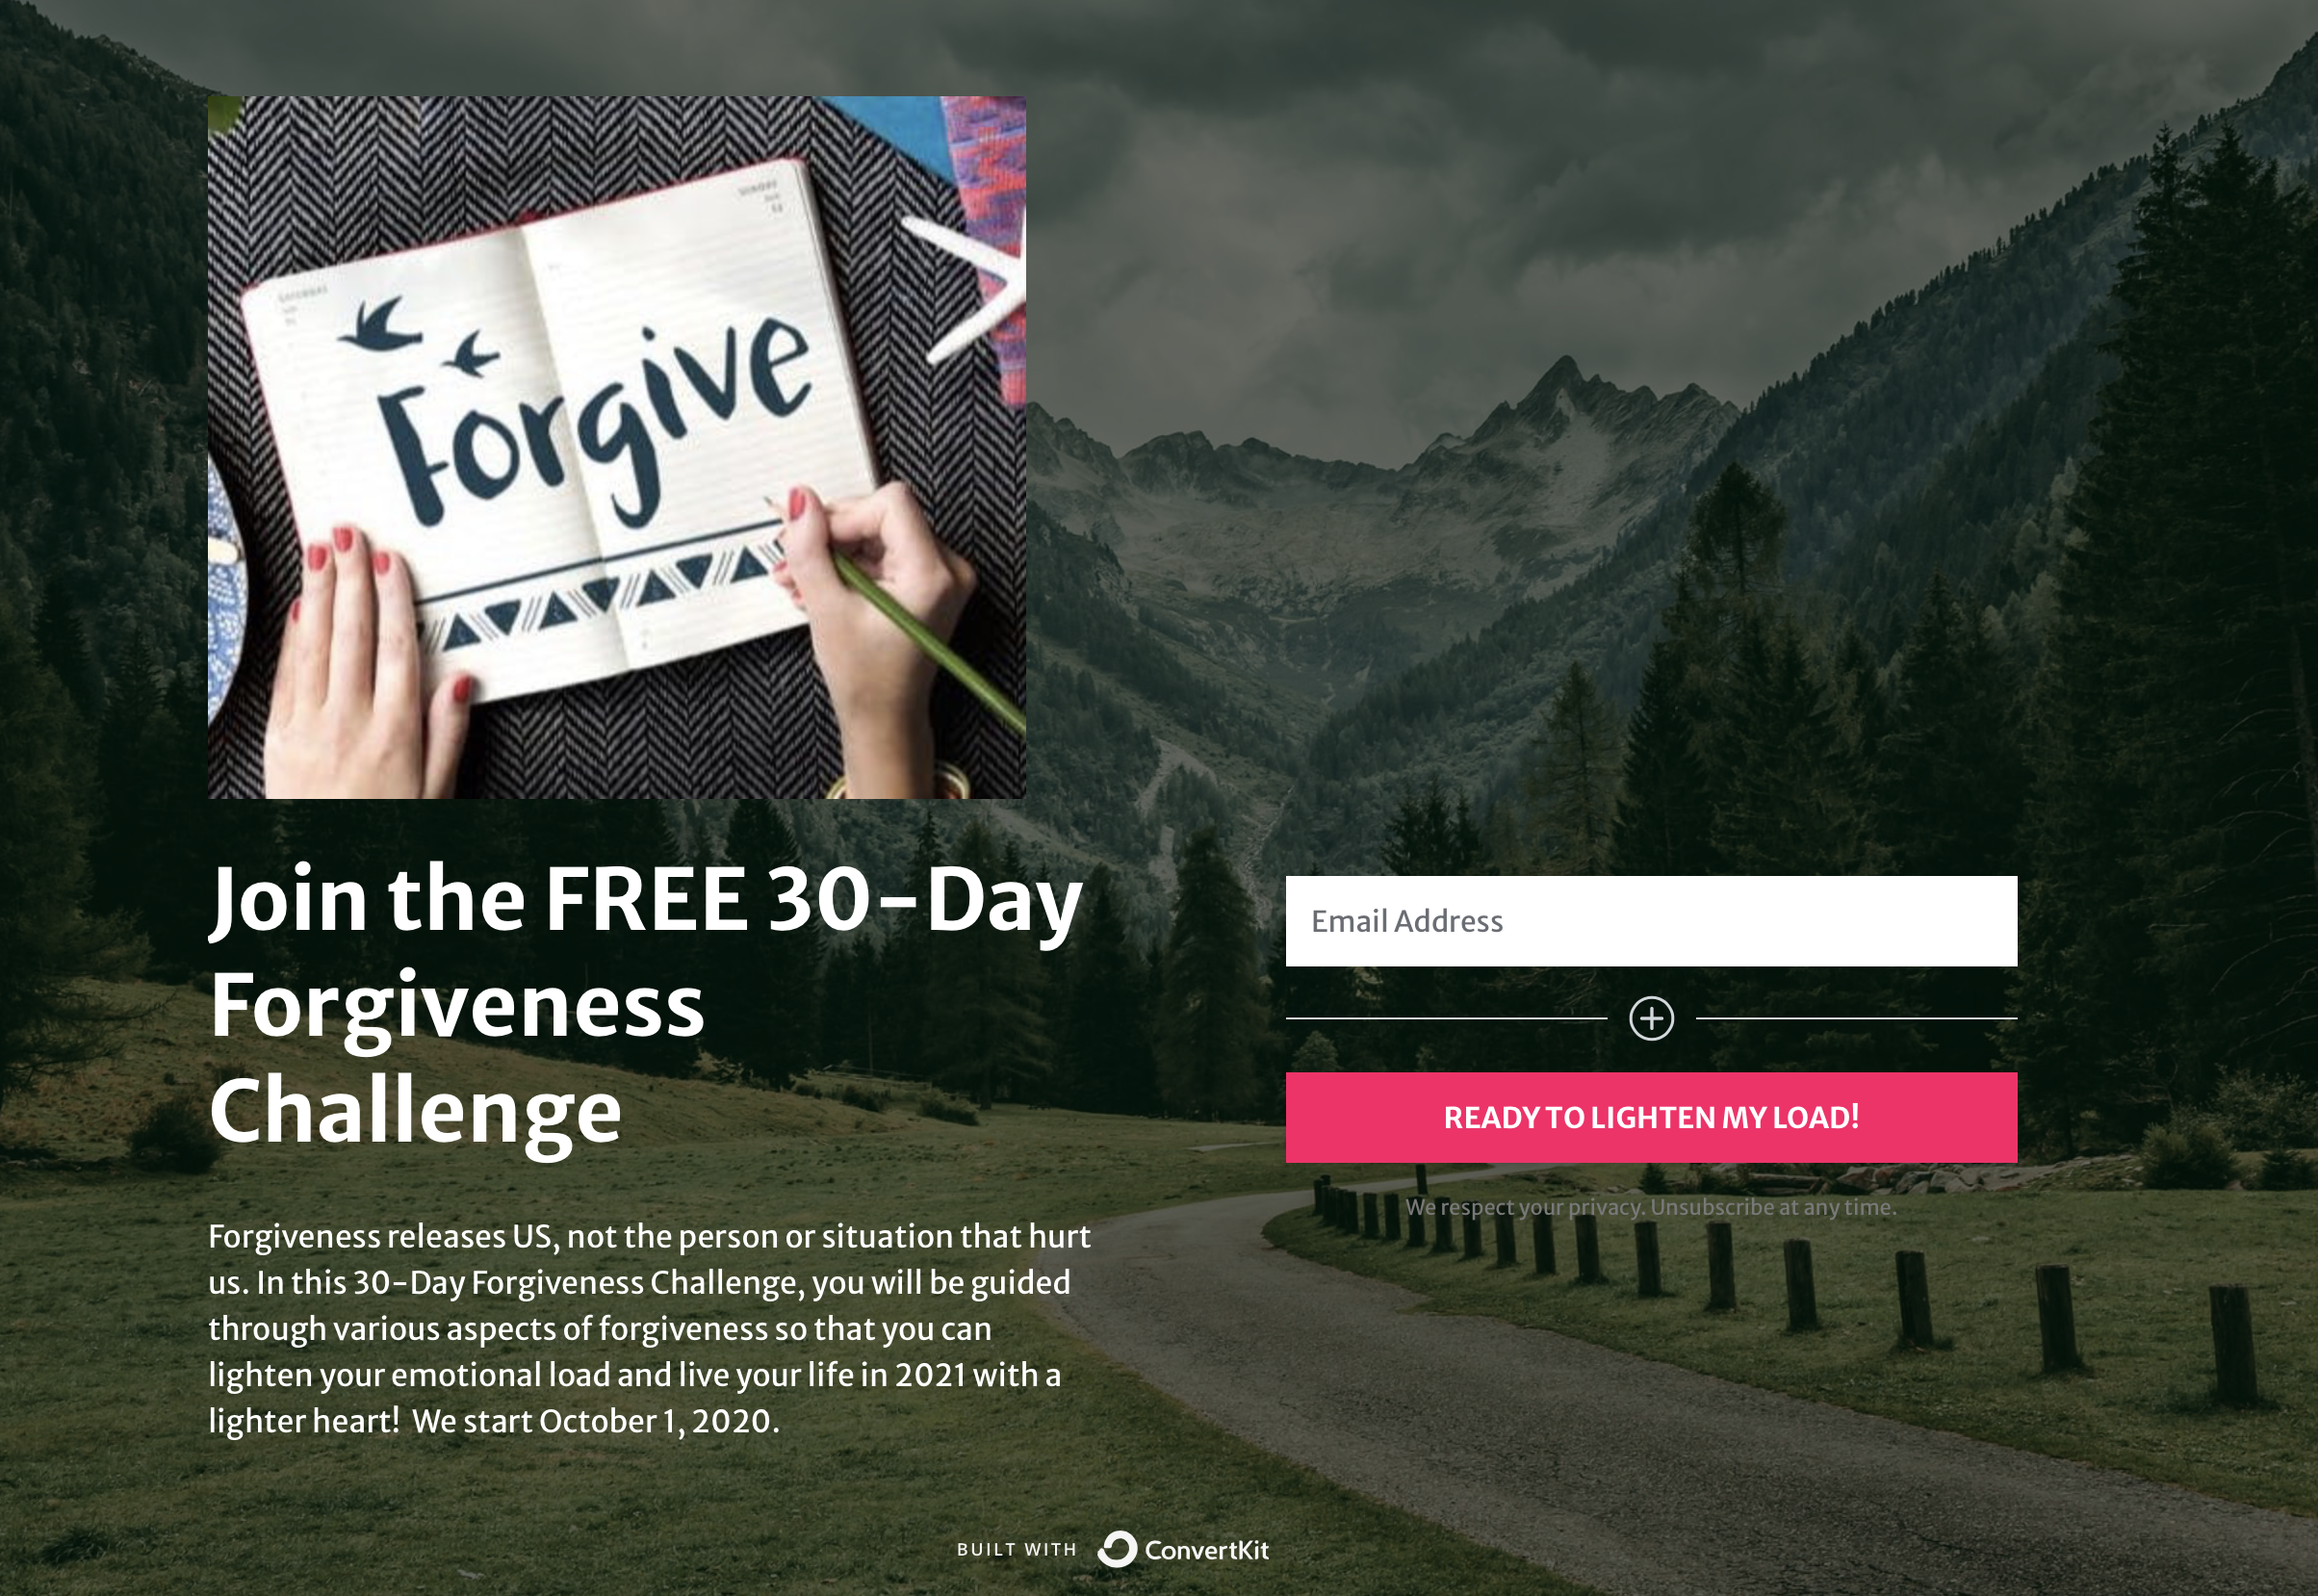 Day 1: What Is Forgiveness?